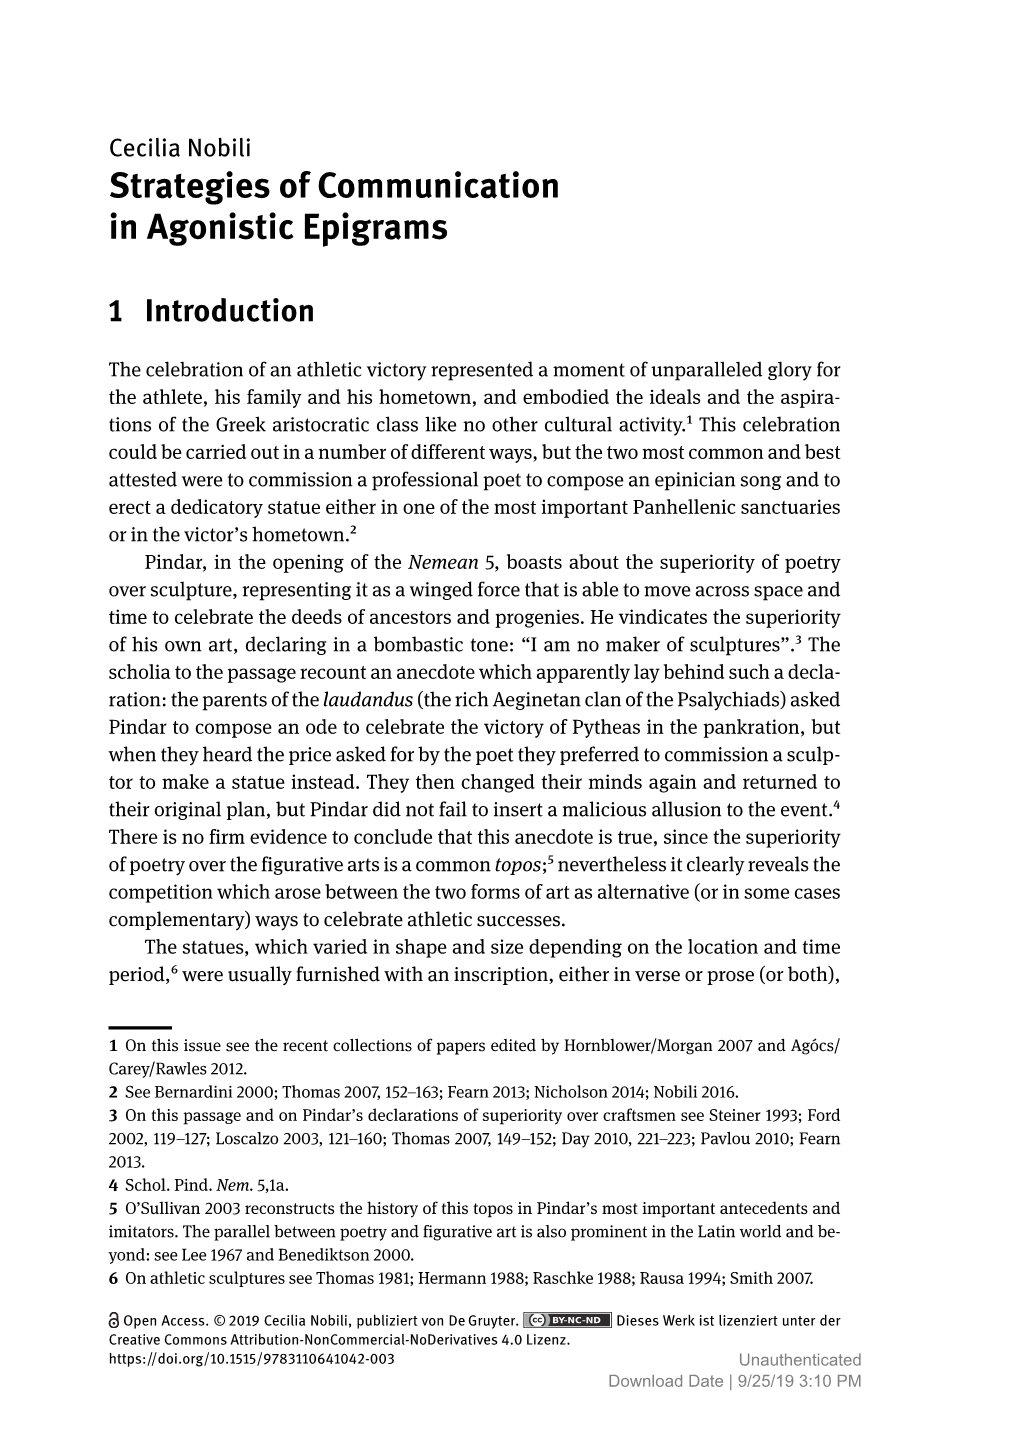 Strategies of Communication in Agonistic Epigrams